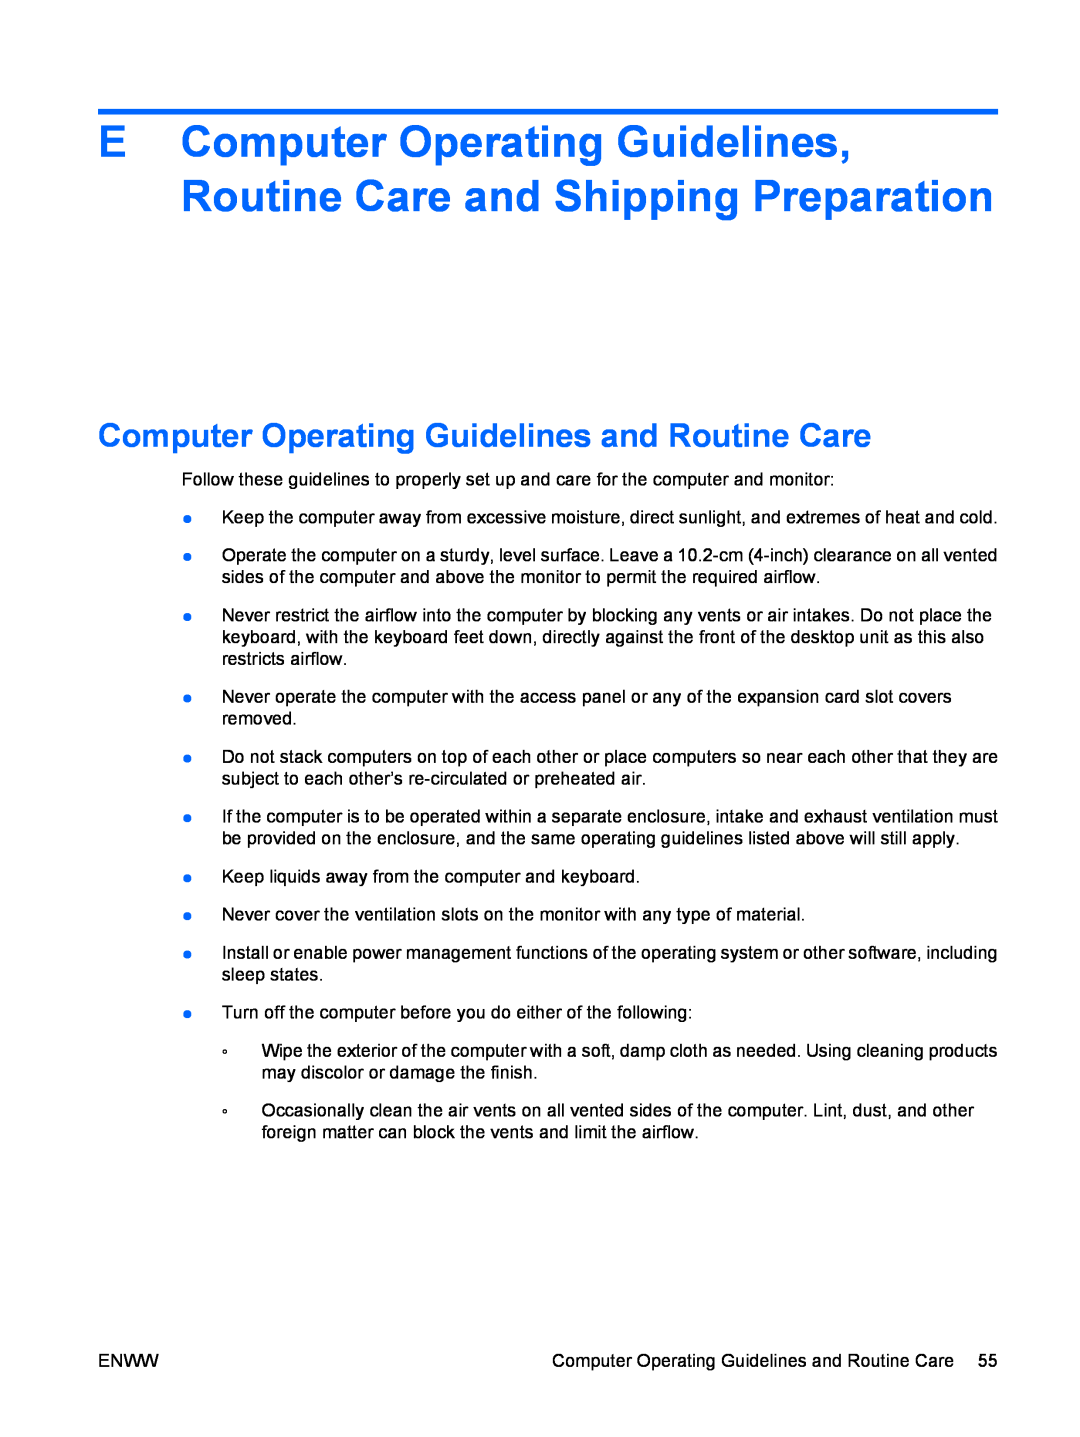 Hitachi 8000 Elite manual Computer Operating Guidelines and Routine Care 